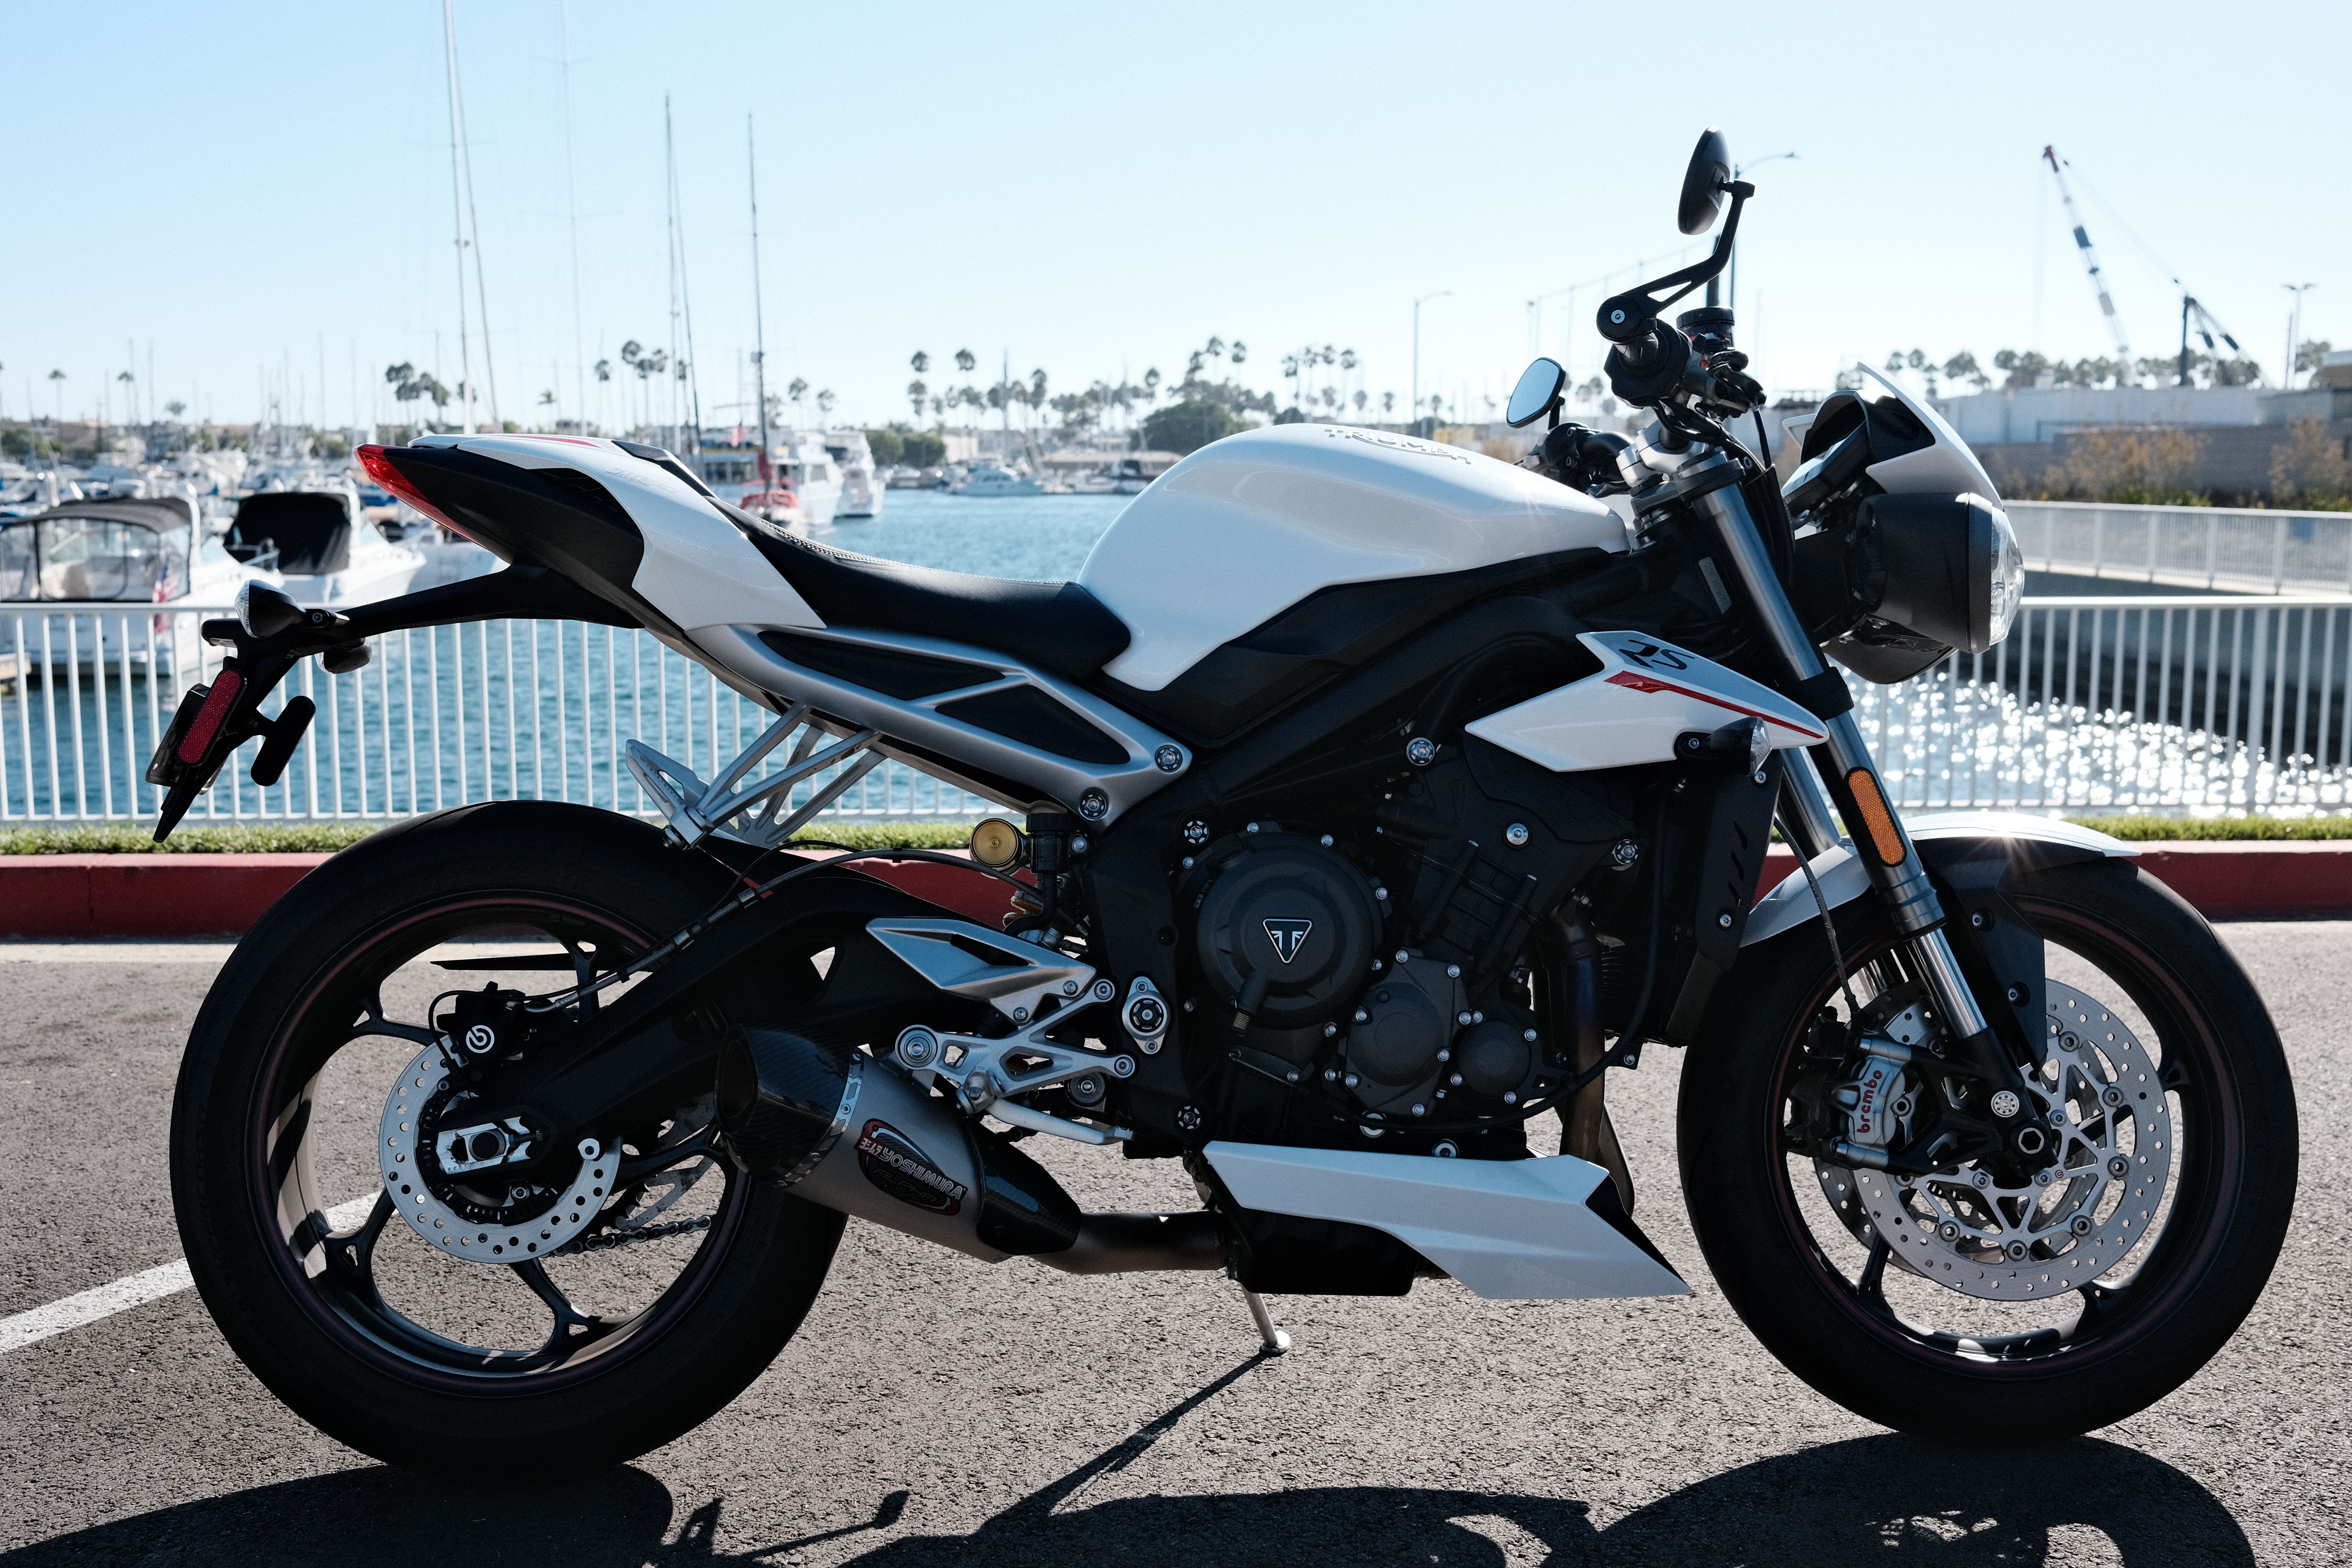 2019 Triumph Street Triple RS 765 Motorcycle - 3800 miles with Warranty and Title